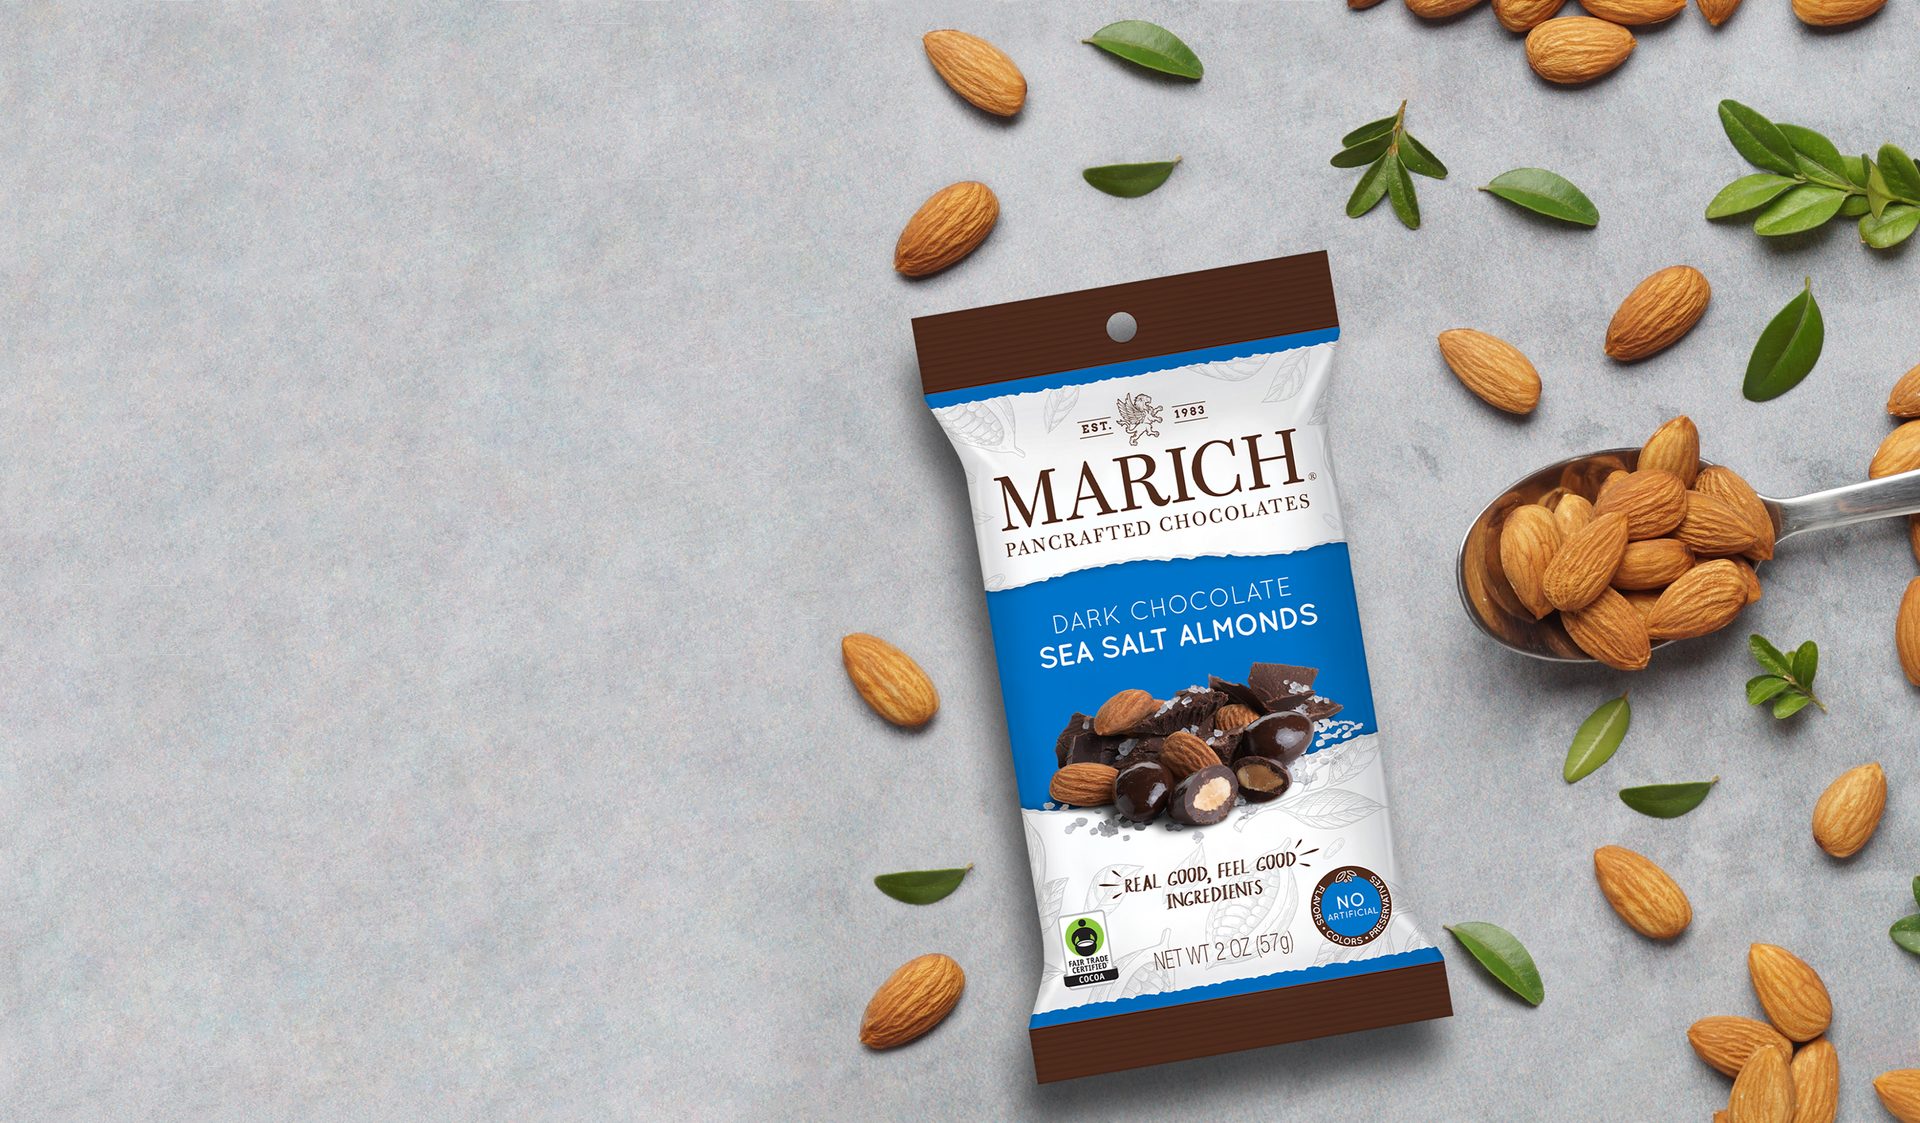 Marich Dark Chocolate Sea Salt Almonds package surrounded by almonds and leaves